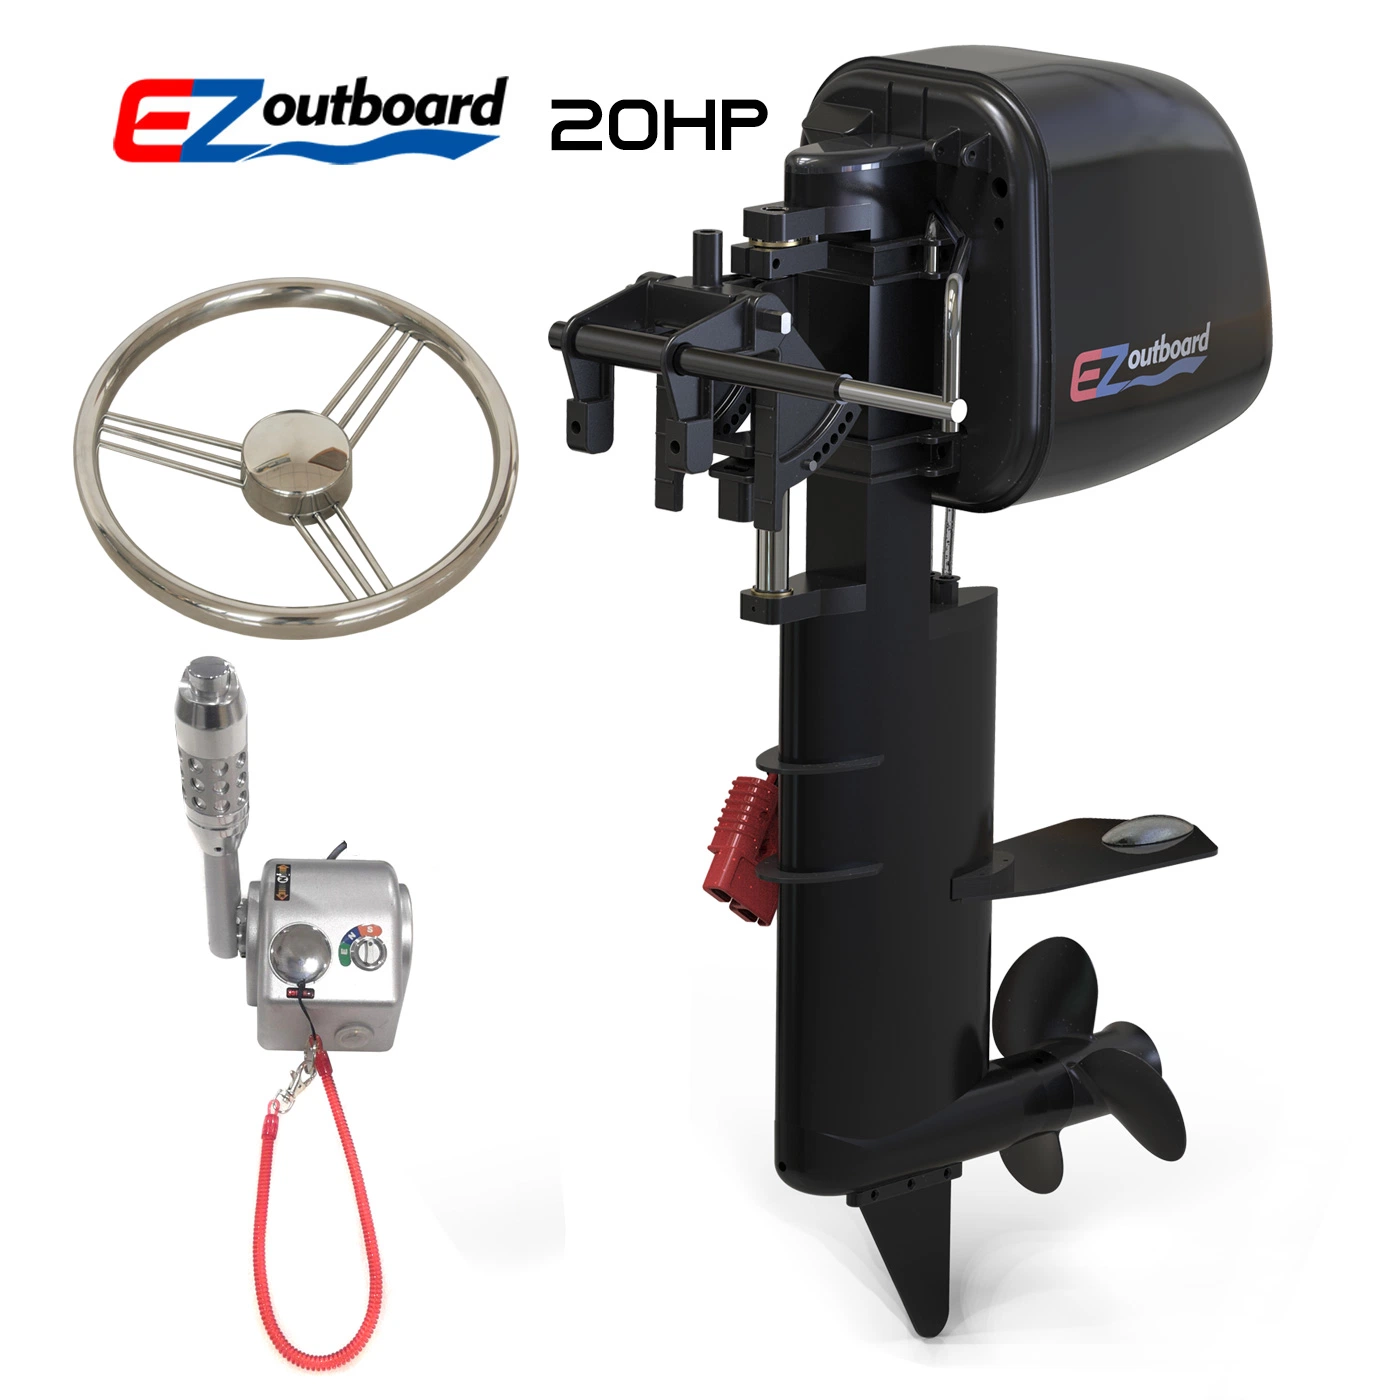 EZ Outboard 6HP 10HP 20HP Sports Version Electric Propulsion Outboard Motor for ships EZ-20HP